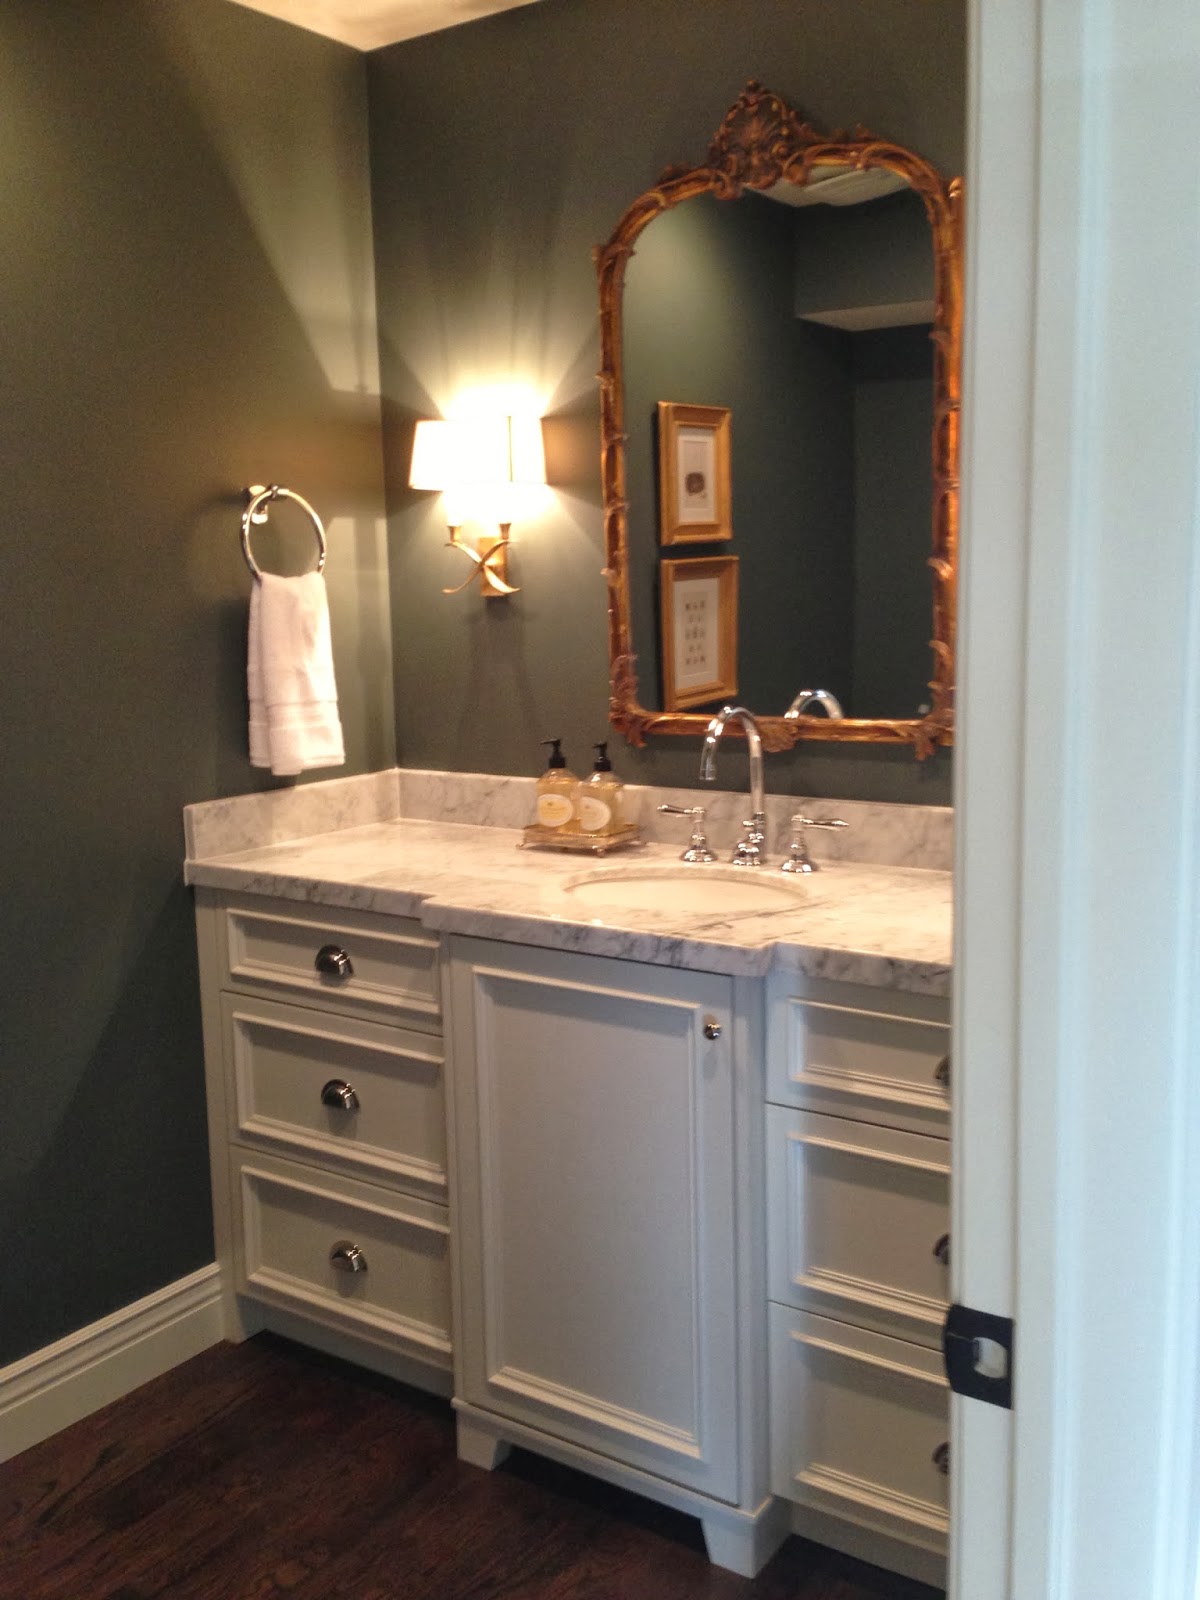 Michele Dunker Interiors: Before & After... BATHROOMS!